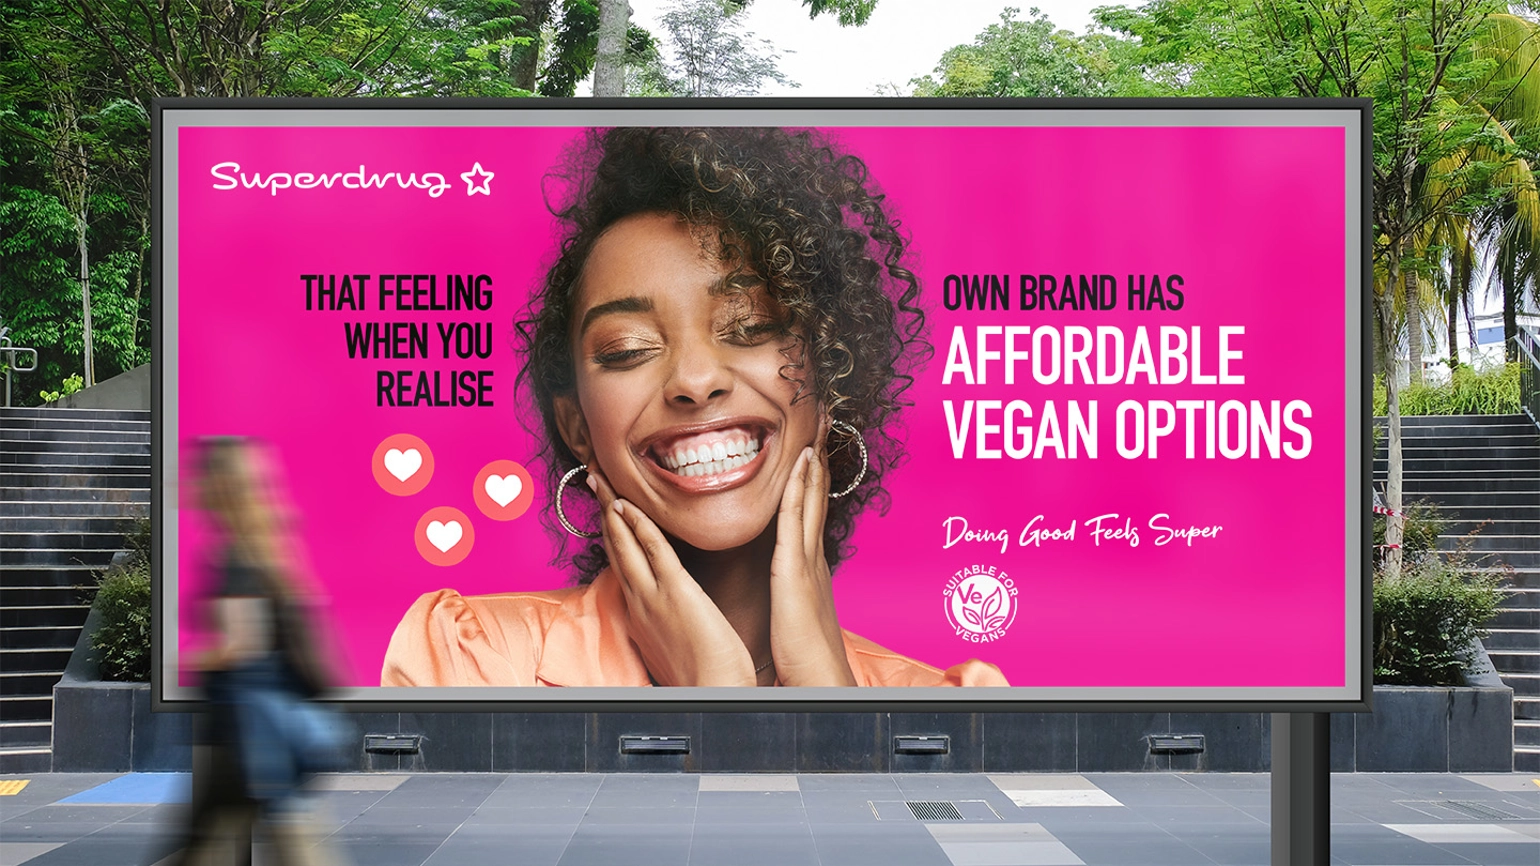 Image of the billboard which has an image of a happy woman with the Superdrug logo and the words that feeling when you realise own brand has affordable vegan options and the strapline doing good feels super